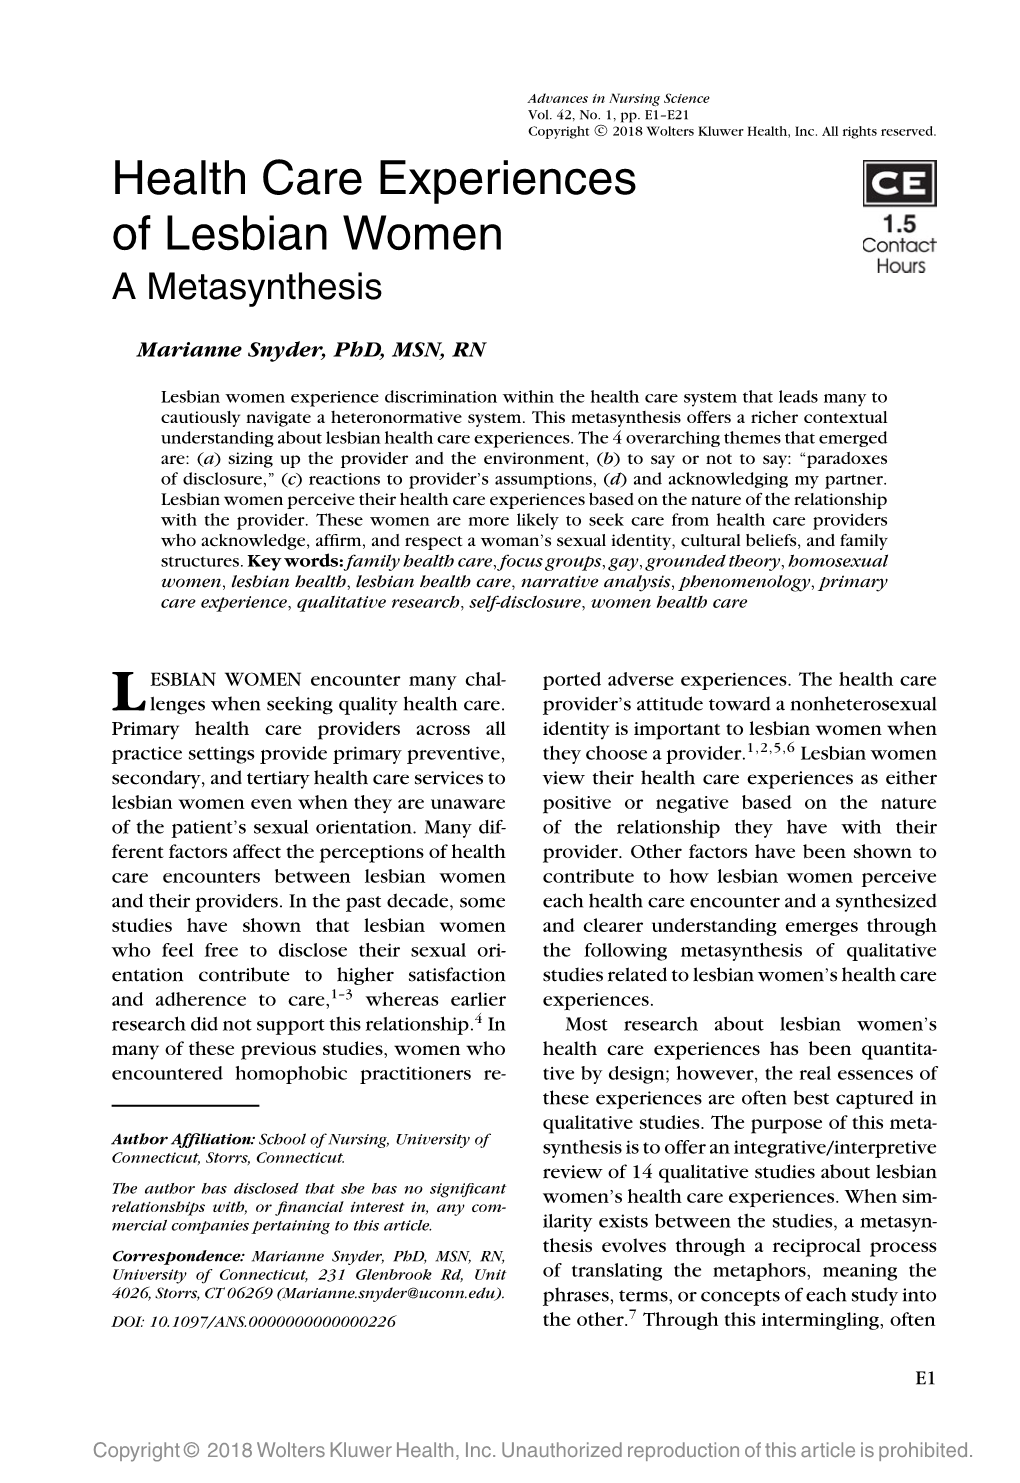 Health Care Experiences of Lesbian Women a Metasynthesis